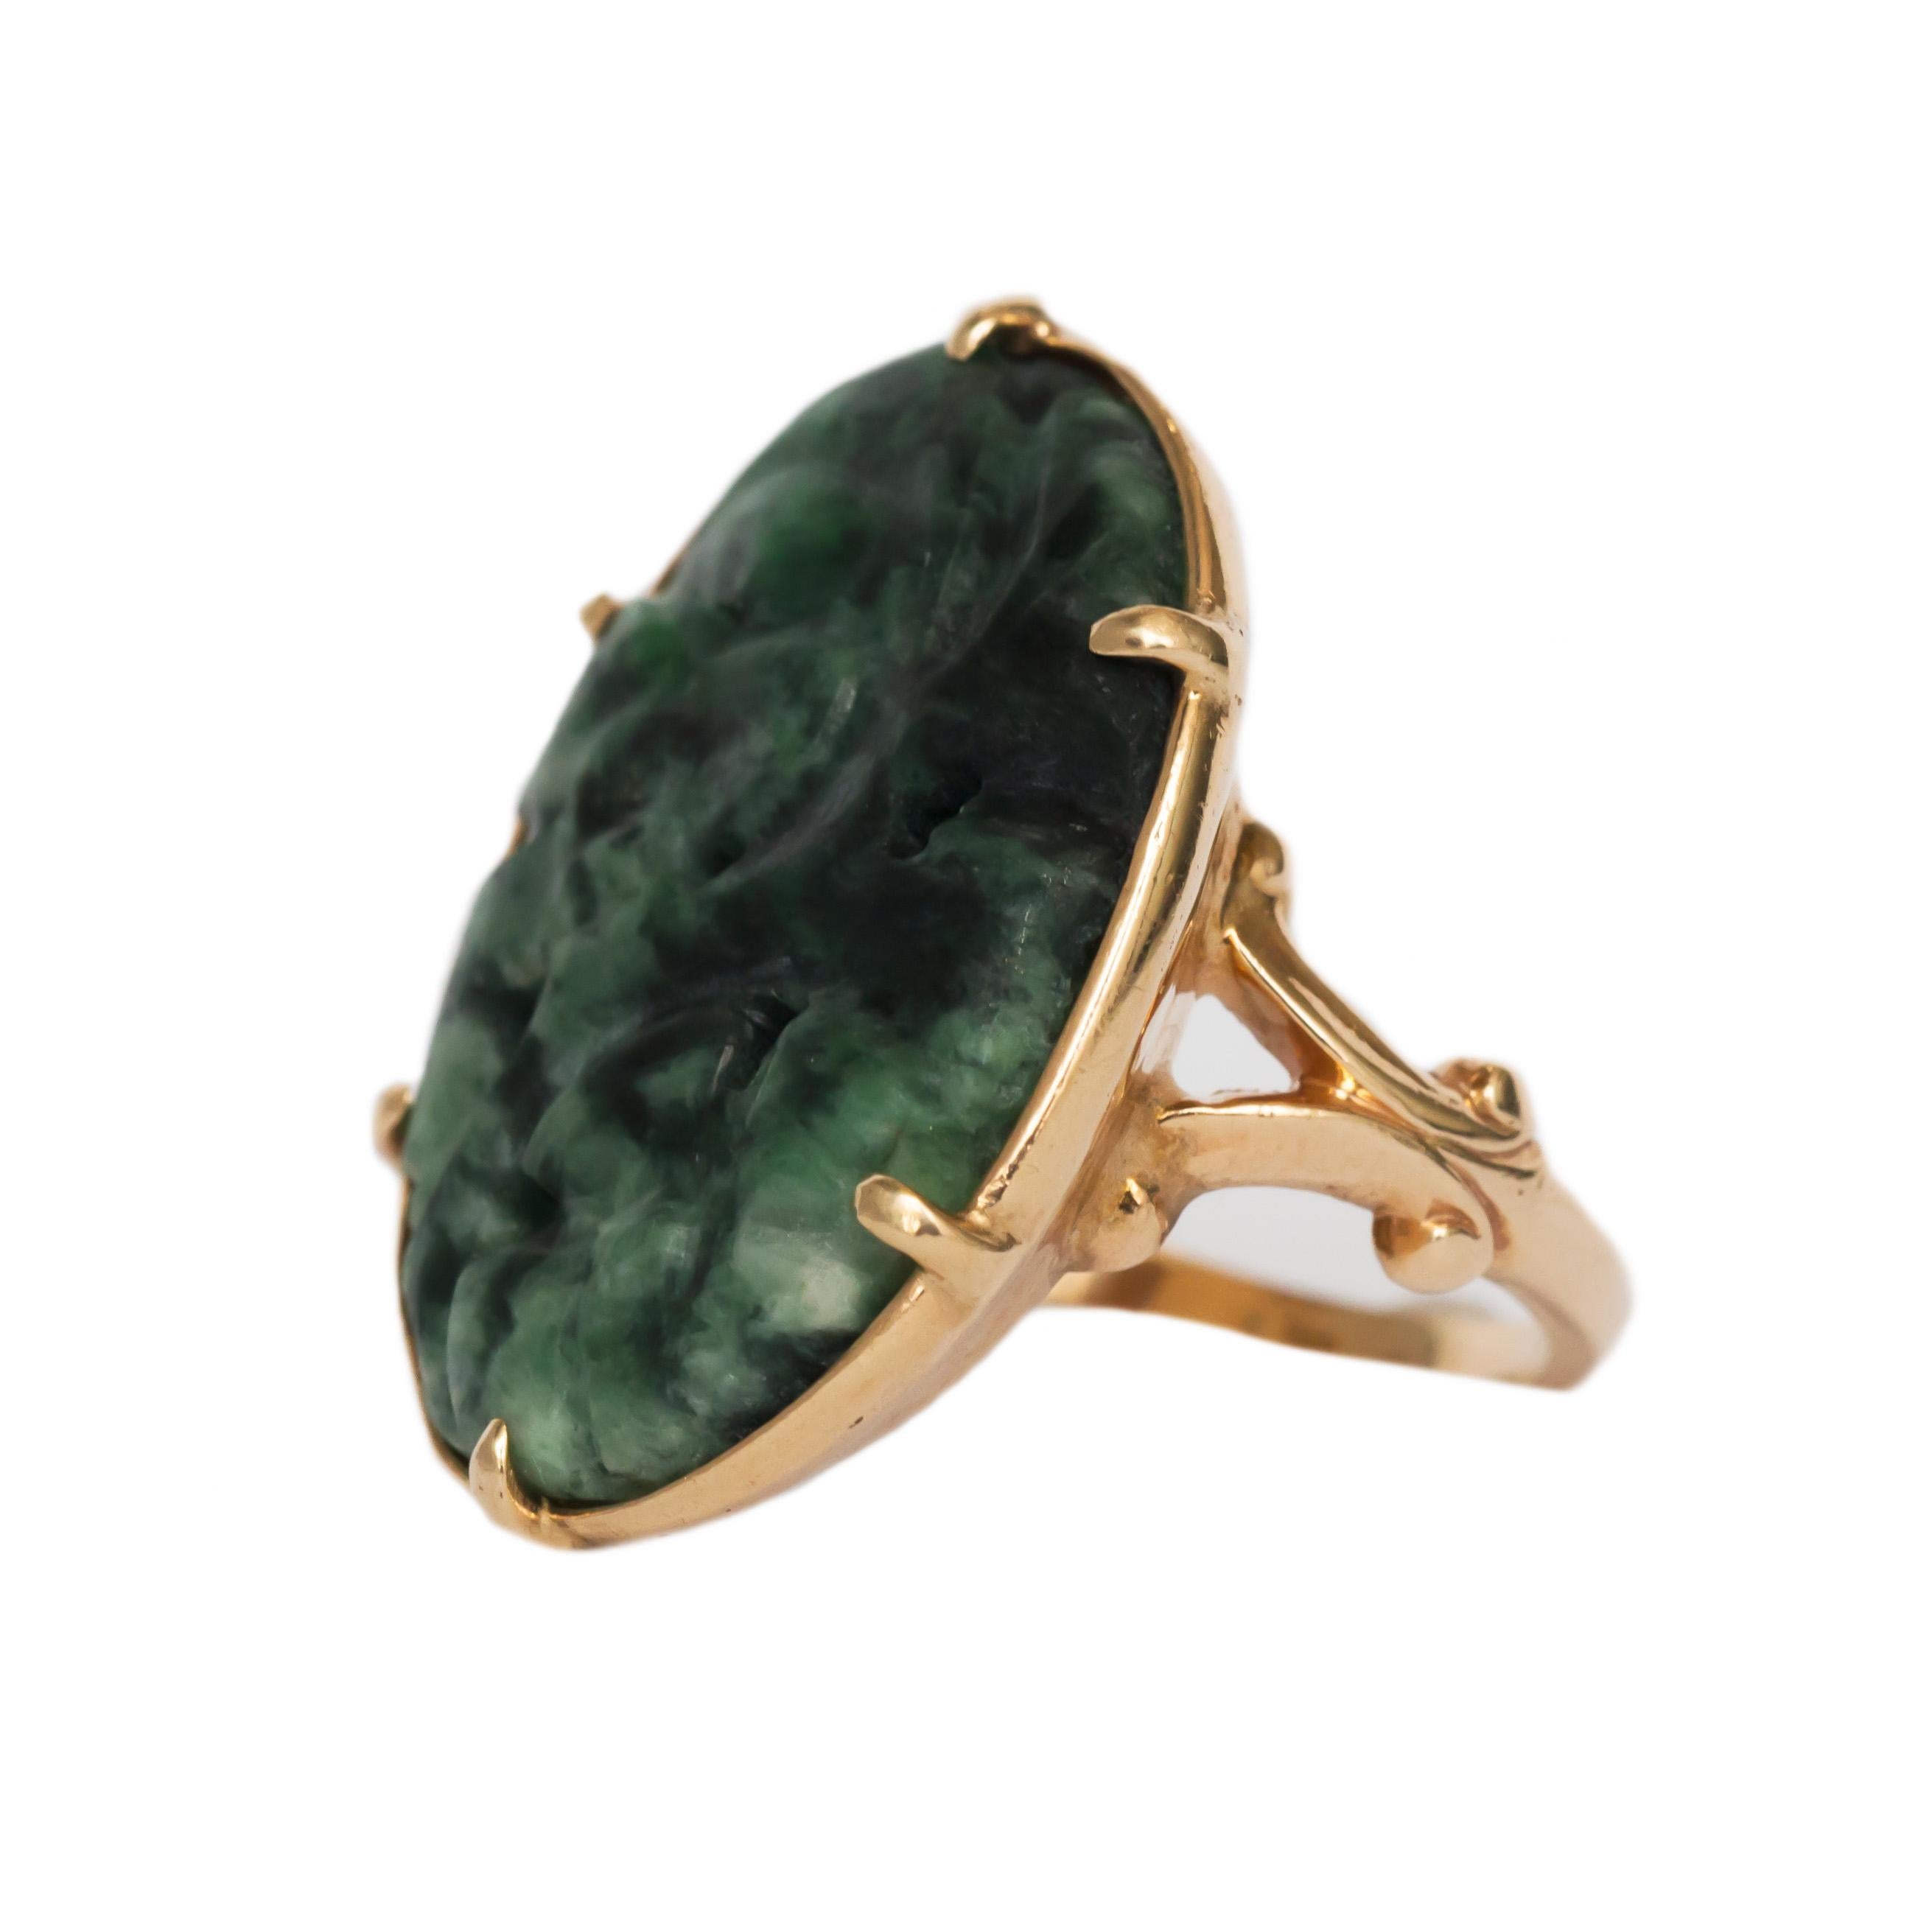 Item Details: 
Ring Size: 5.5
Metal Type: 14 karat Yellow Gold 
Weight: 7.3 grams

Center Details
Type: Natural Jade 
Shape: Carved Oval
Carat Weight: 5.00 carat
Color: Green

Finger to Top of Stone Measurement: 4.01mm